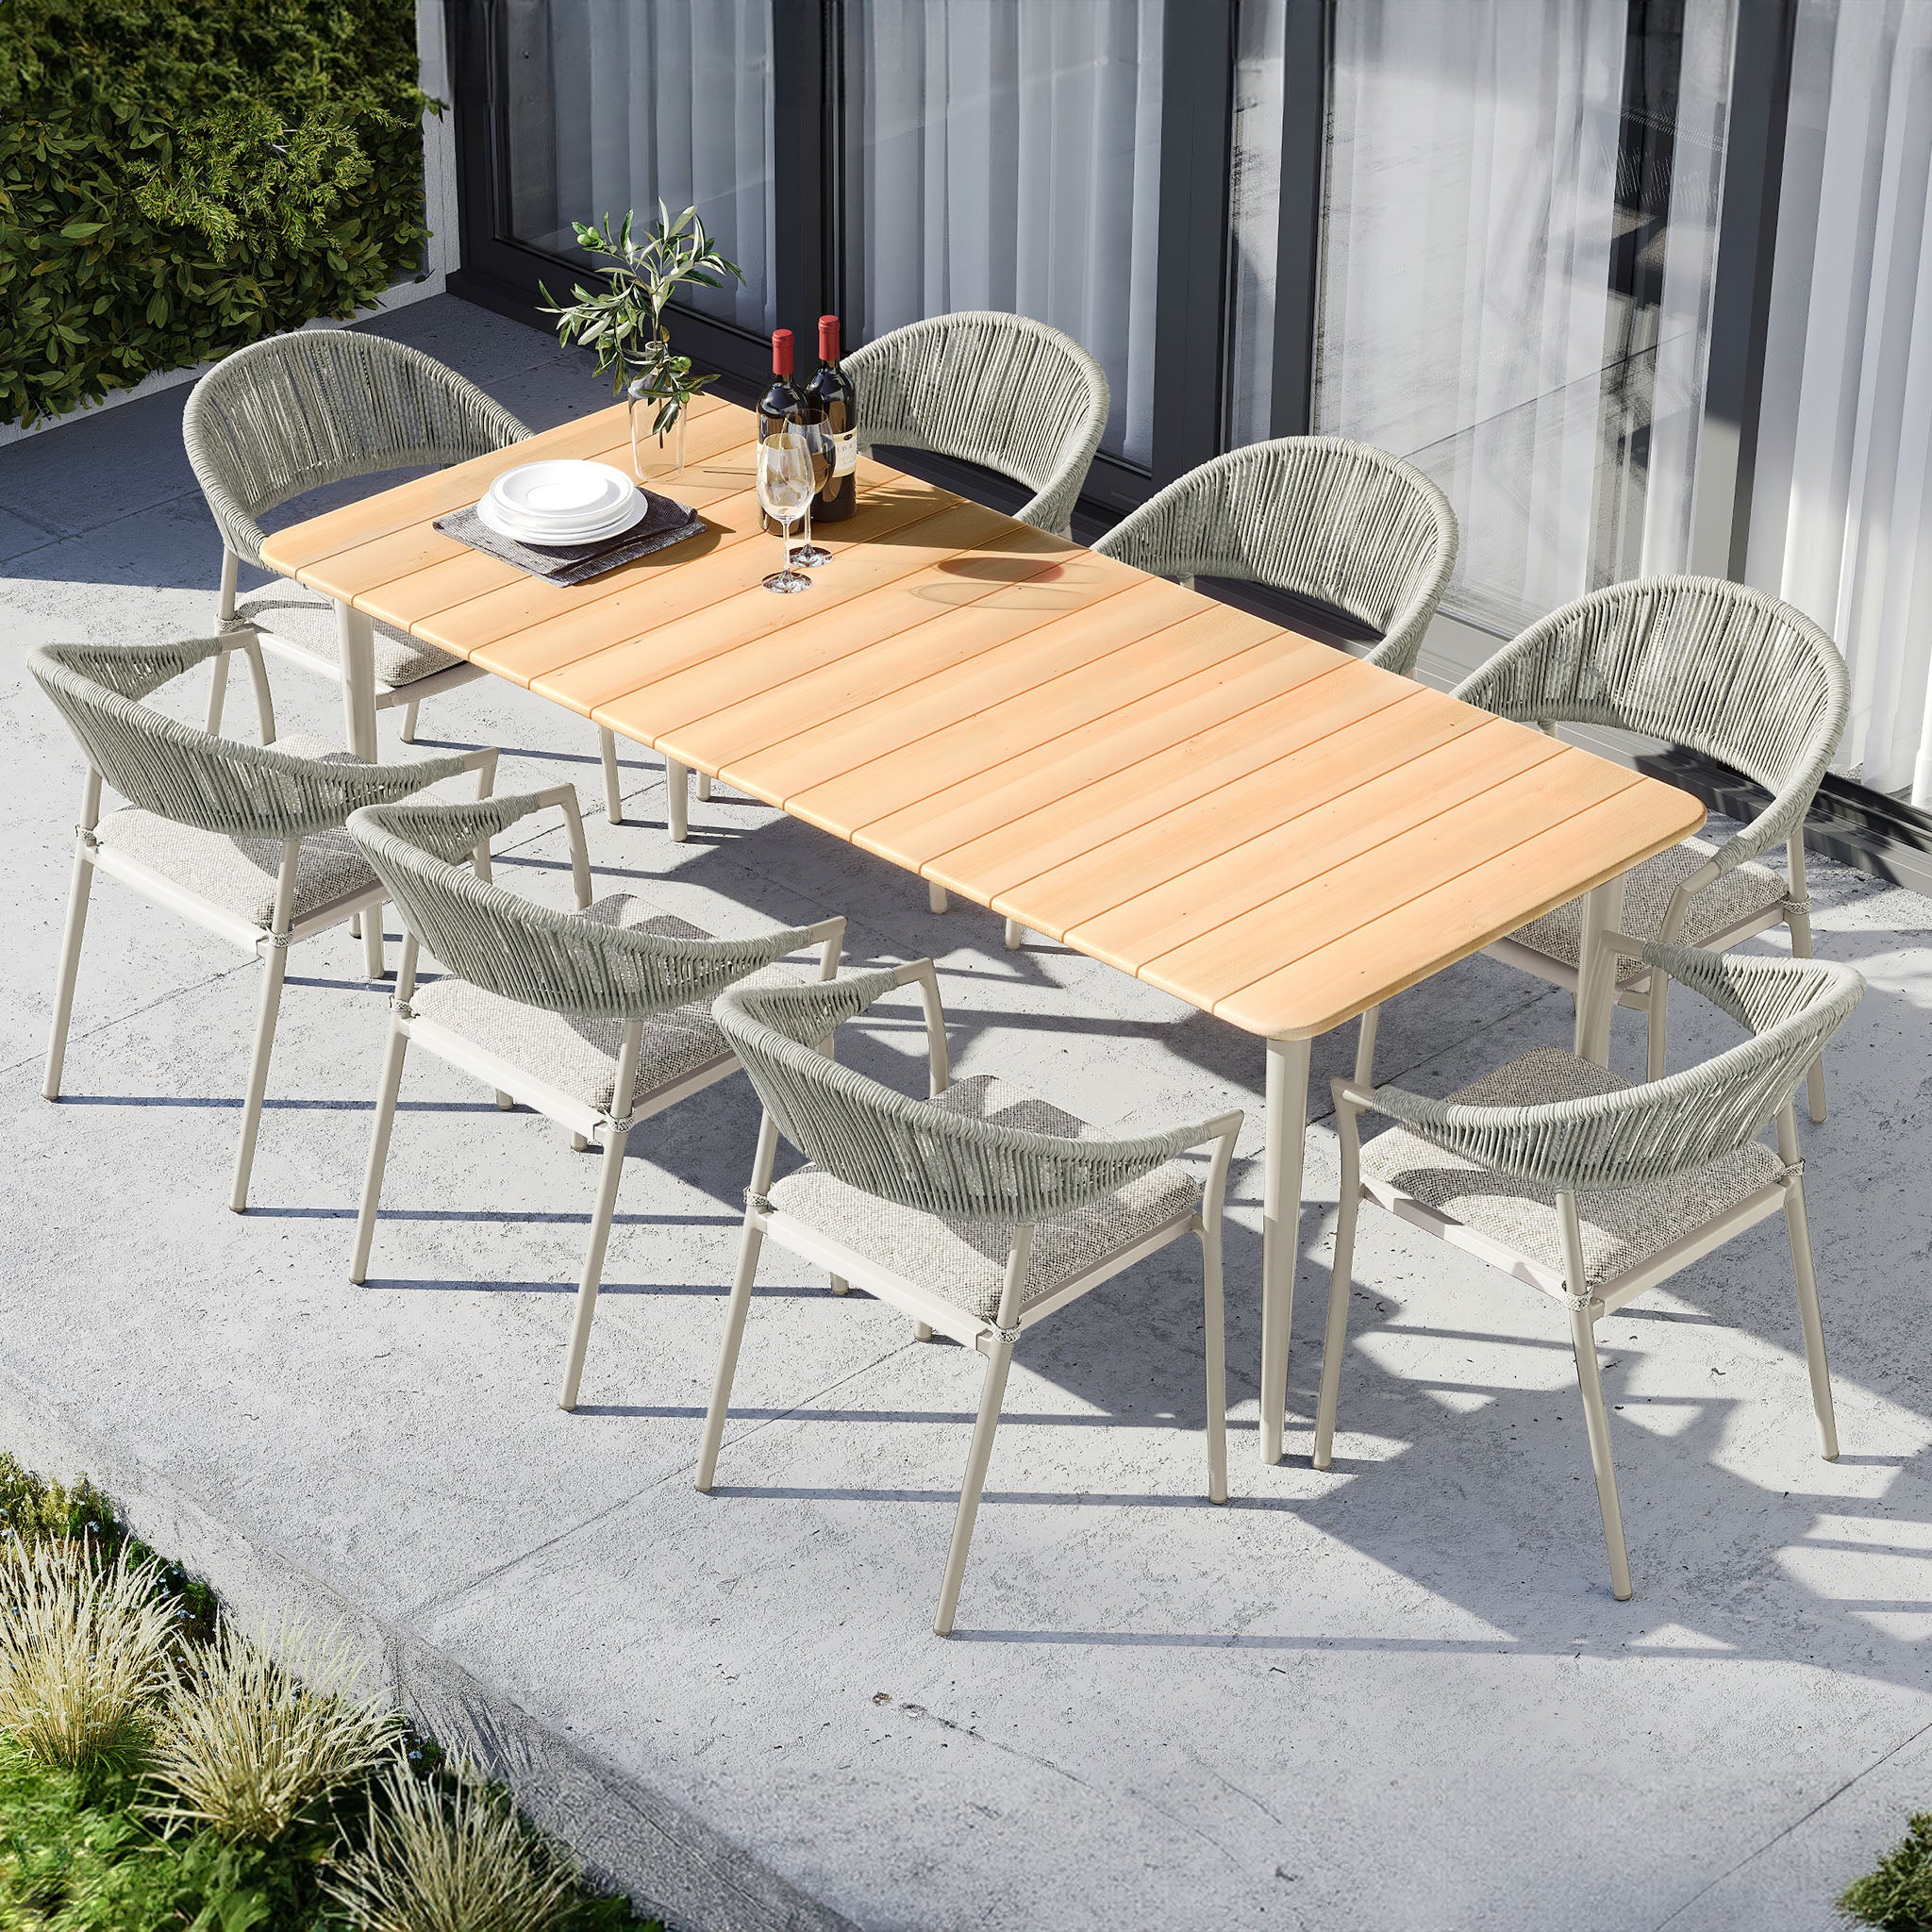 Cloverly 8 Seat Rectangular Dining with Teak Table in Latte